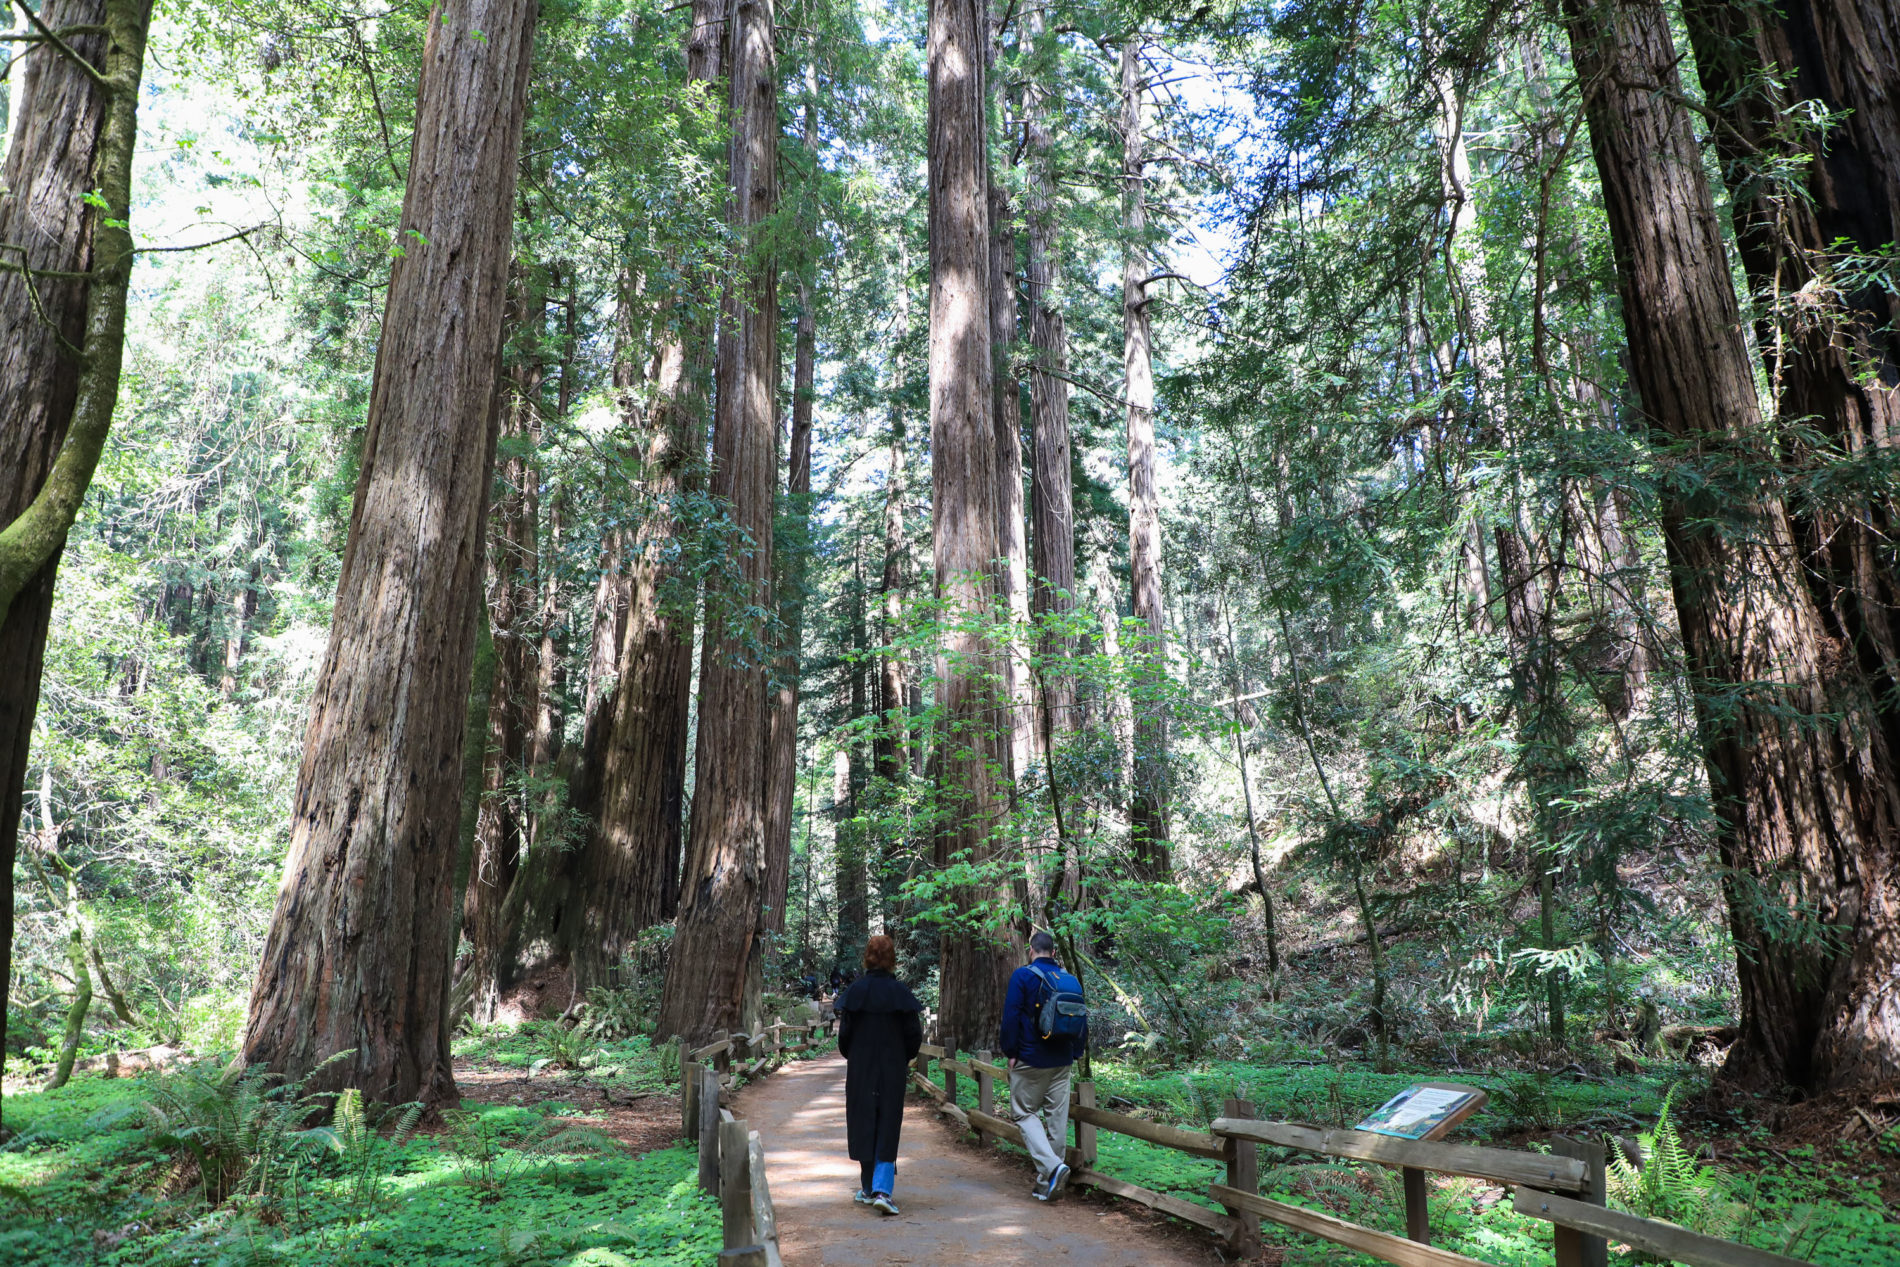 Section of the trail in Muir Woods with an interpretive sign in the lower right corner.